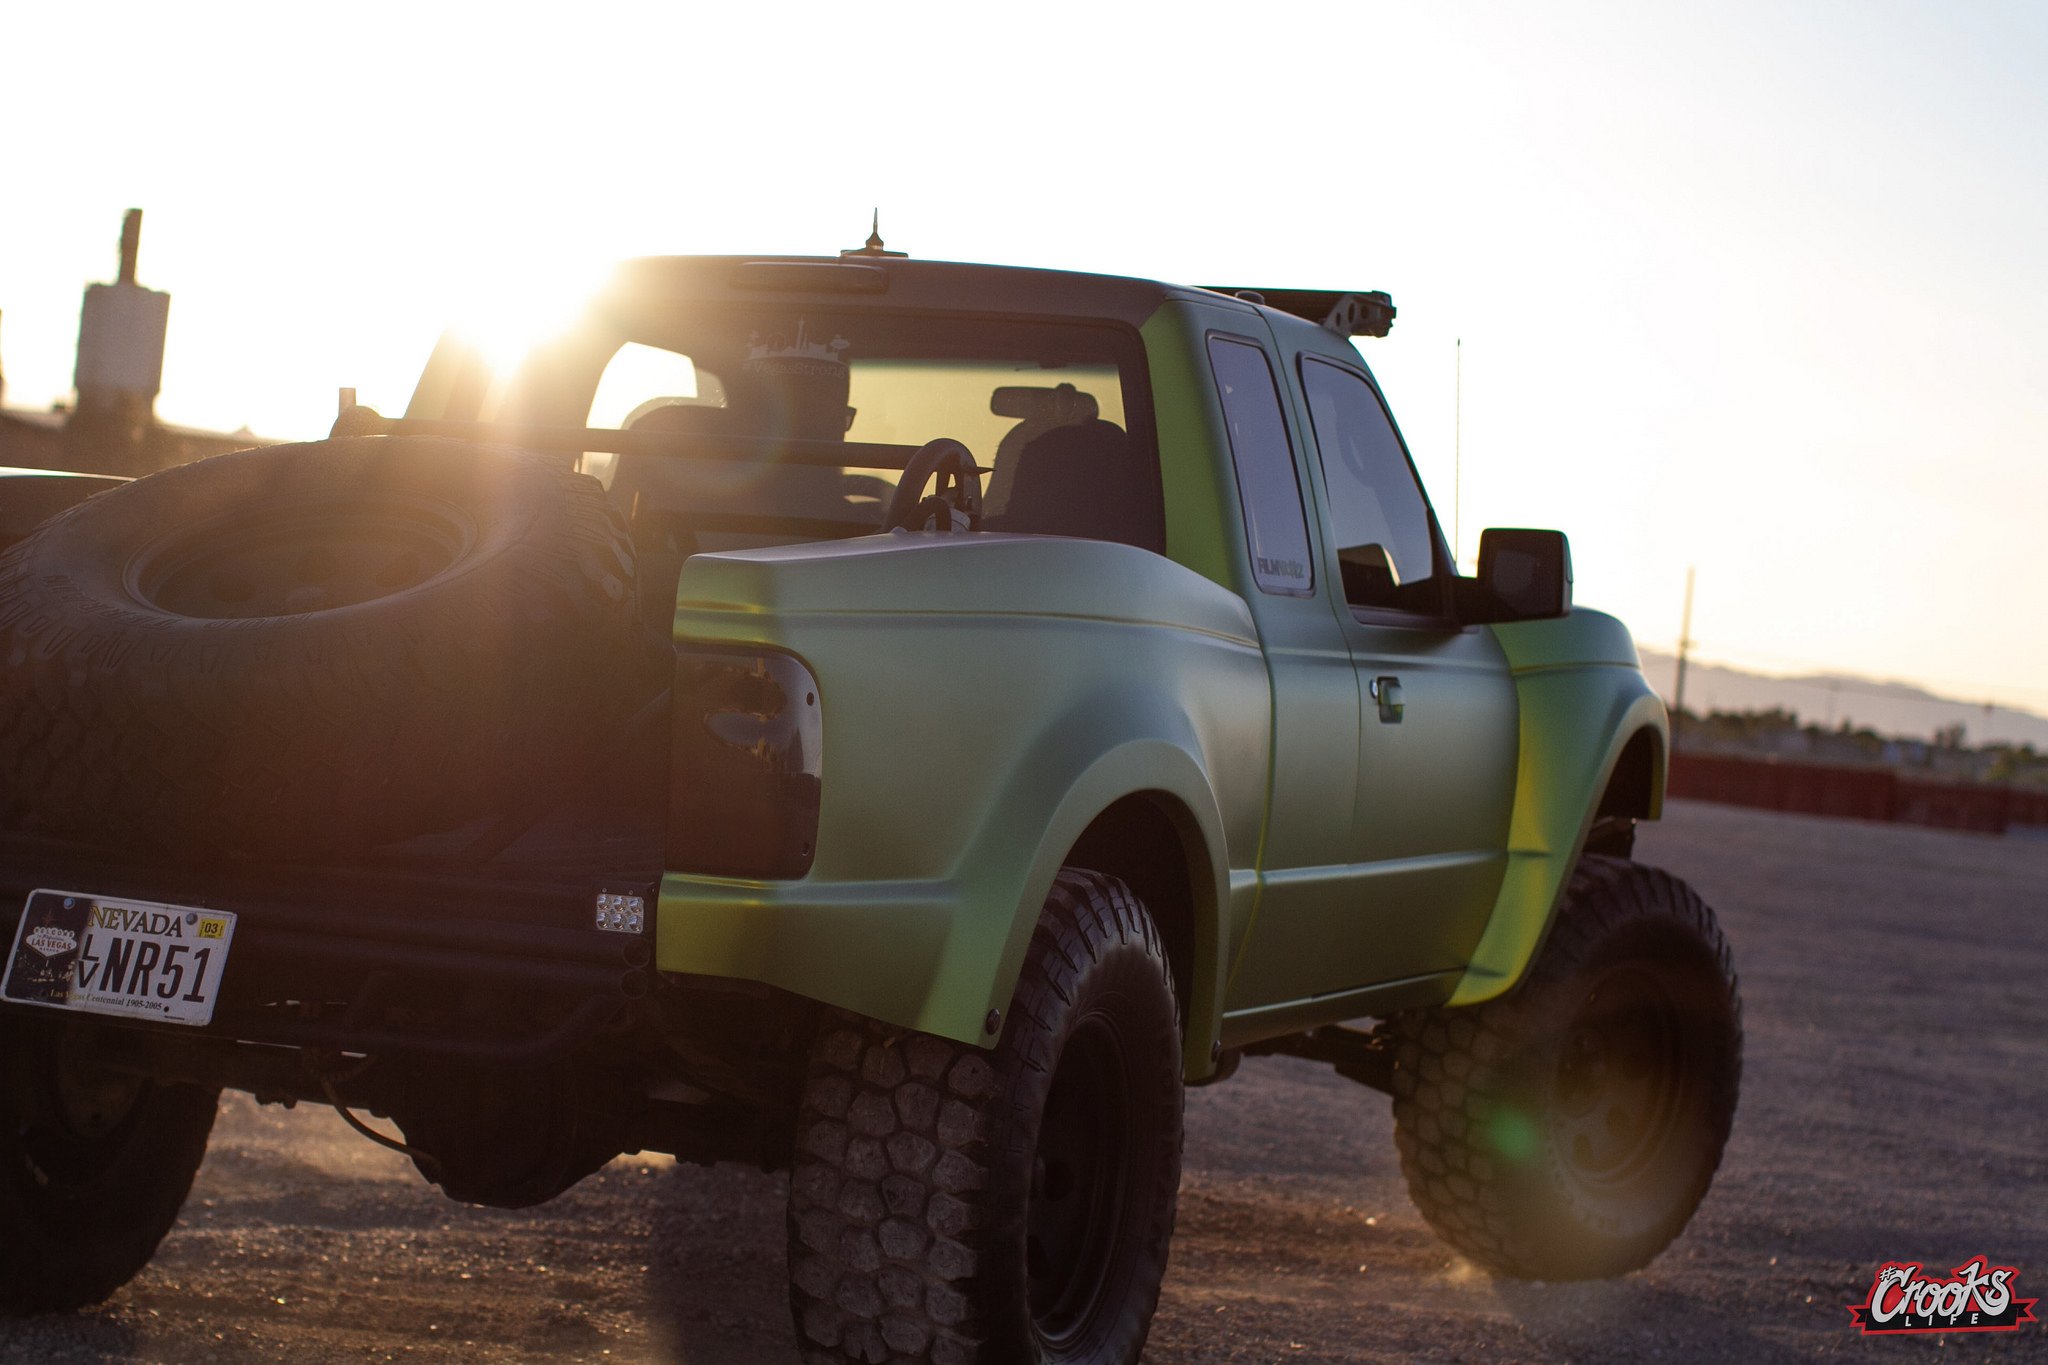 Spare Tire Kit on Metallic Green Ford Ranger - Photo by Jimmy Crook